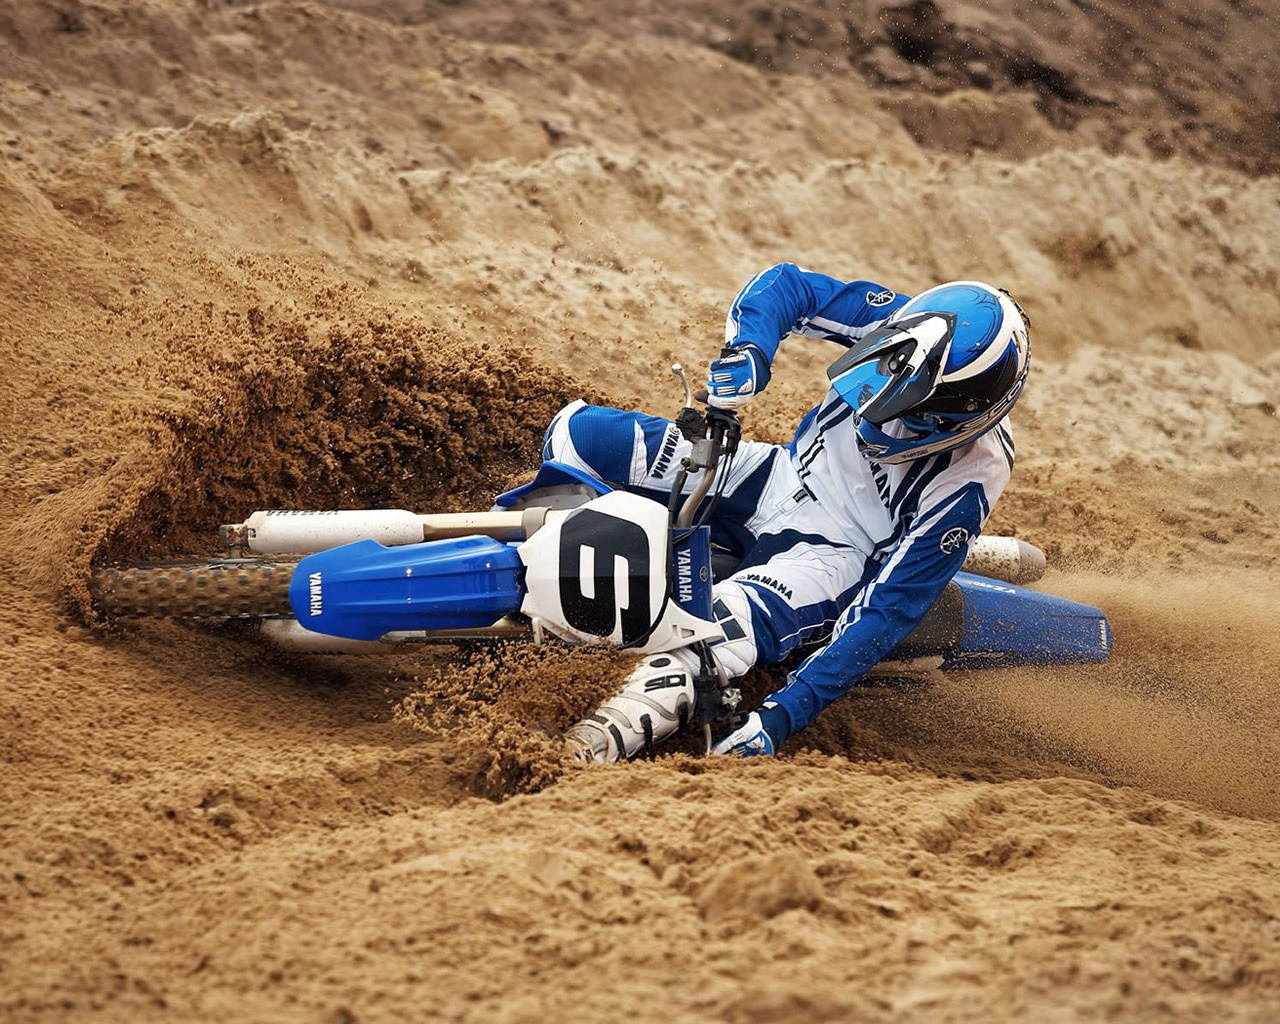 Extreme Moto Race for 1280 x 1024 resolution